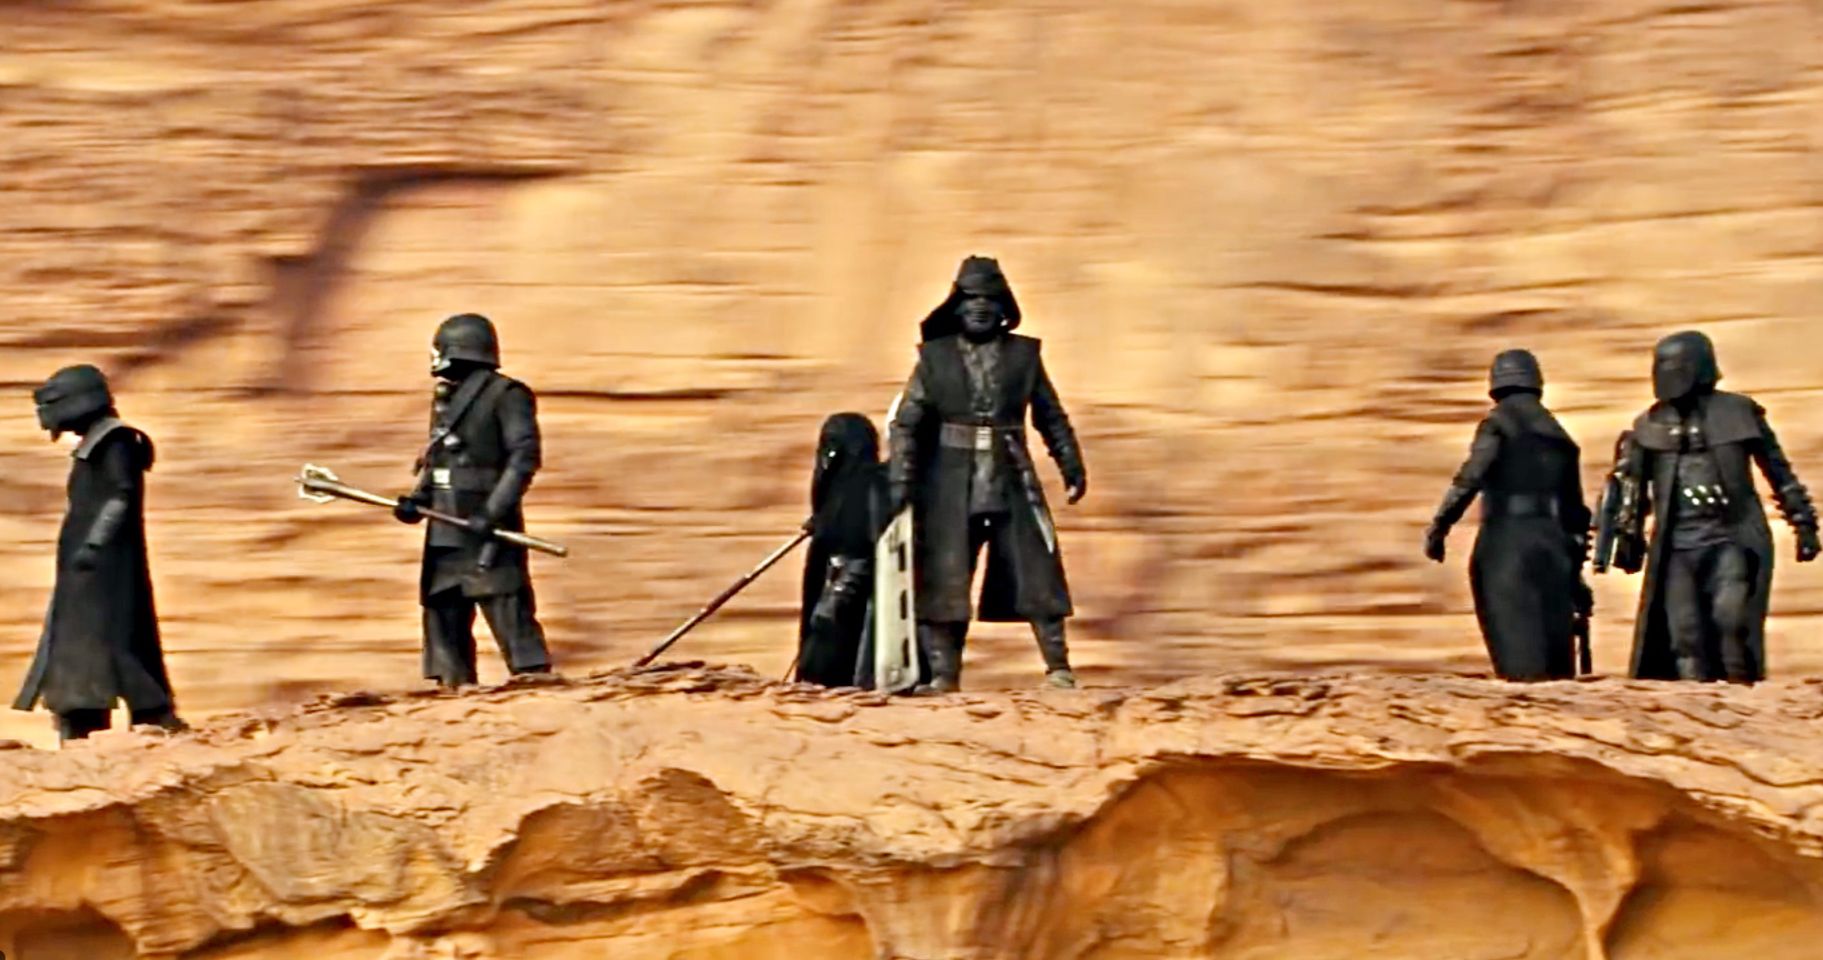 The Rise of Skywalker TV Trailer Shows Sith Troopers and the Knights of Ren in Action